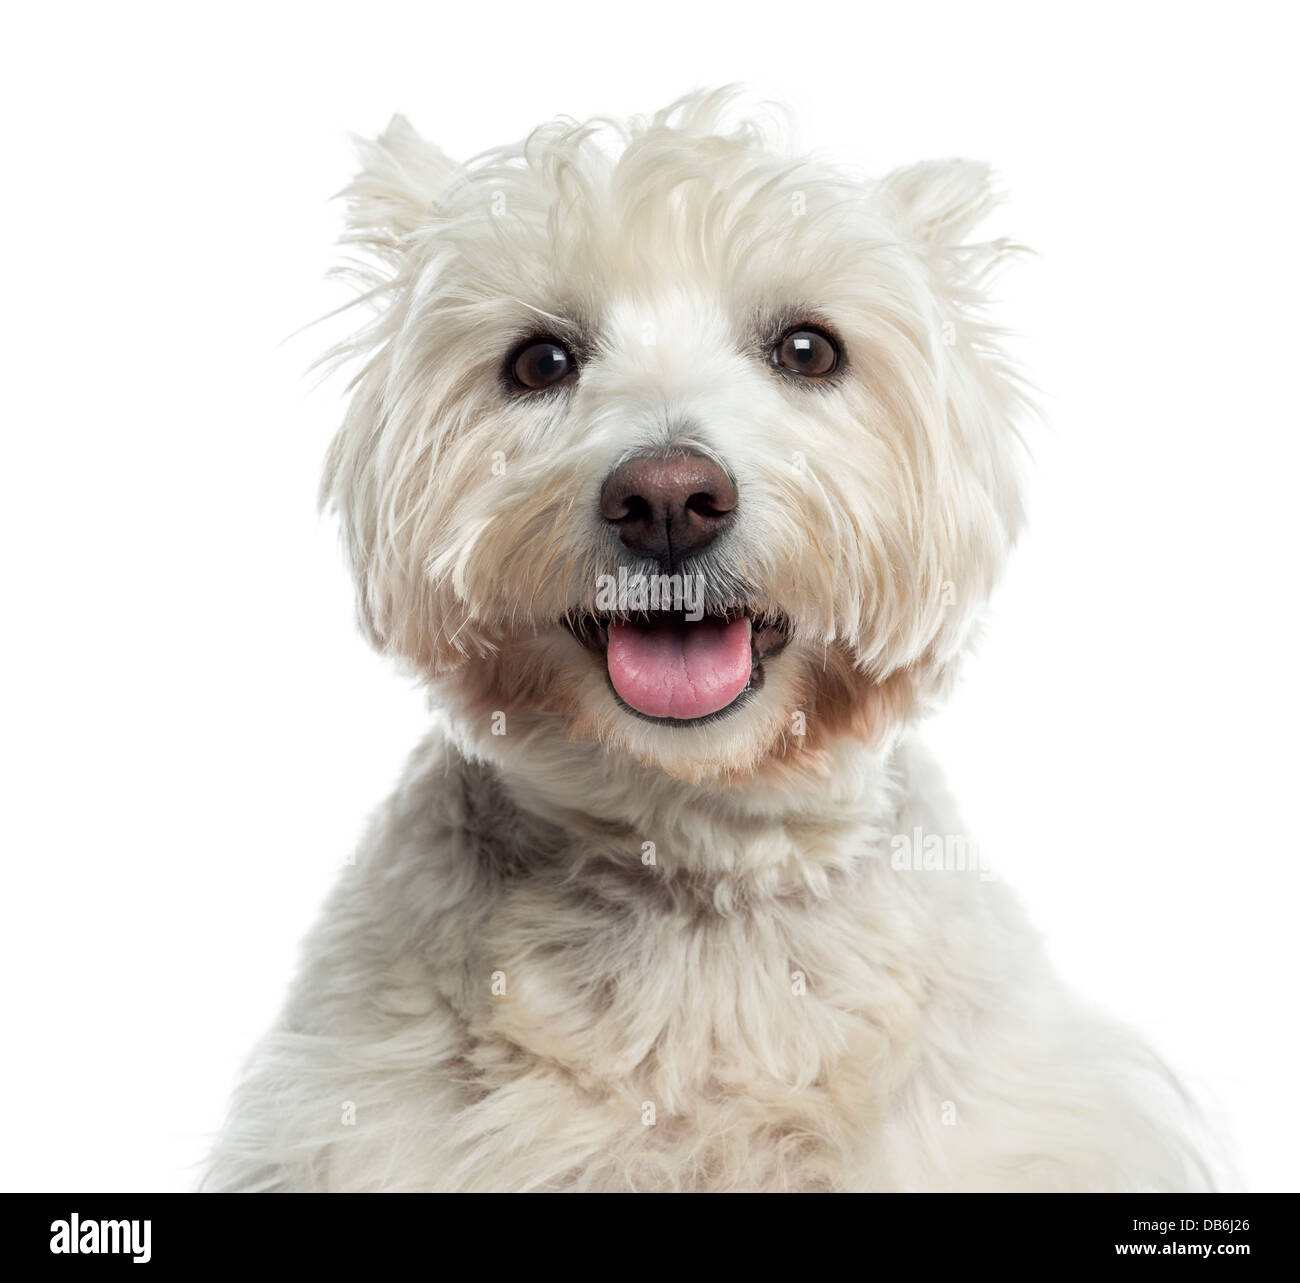 Close-up of West Highland White Terrier contre fond blanc Banque D'Images